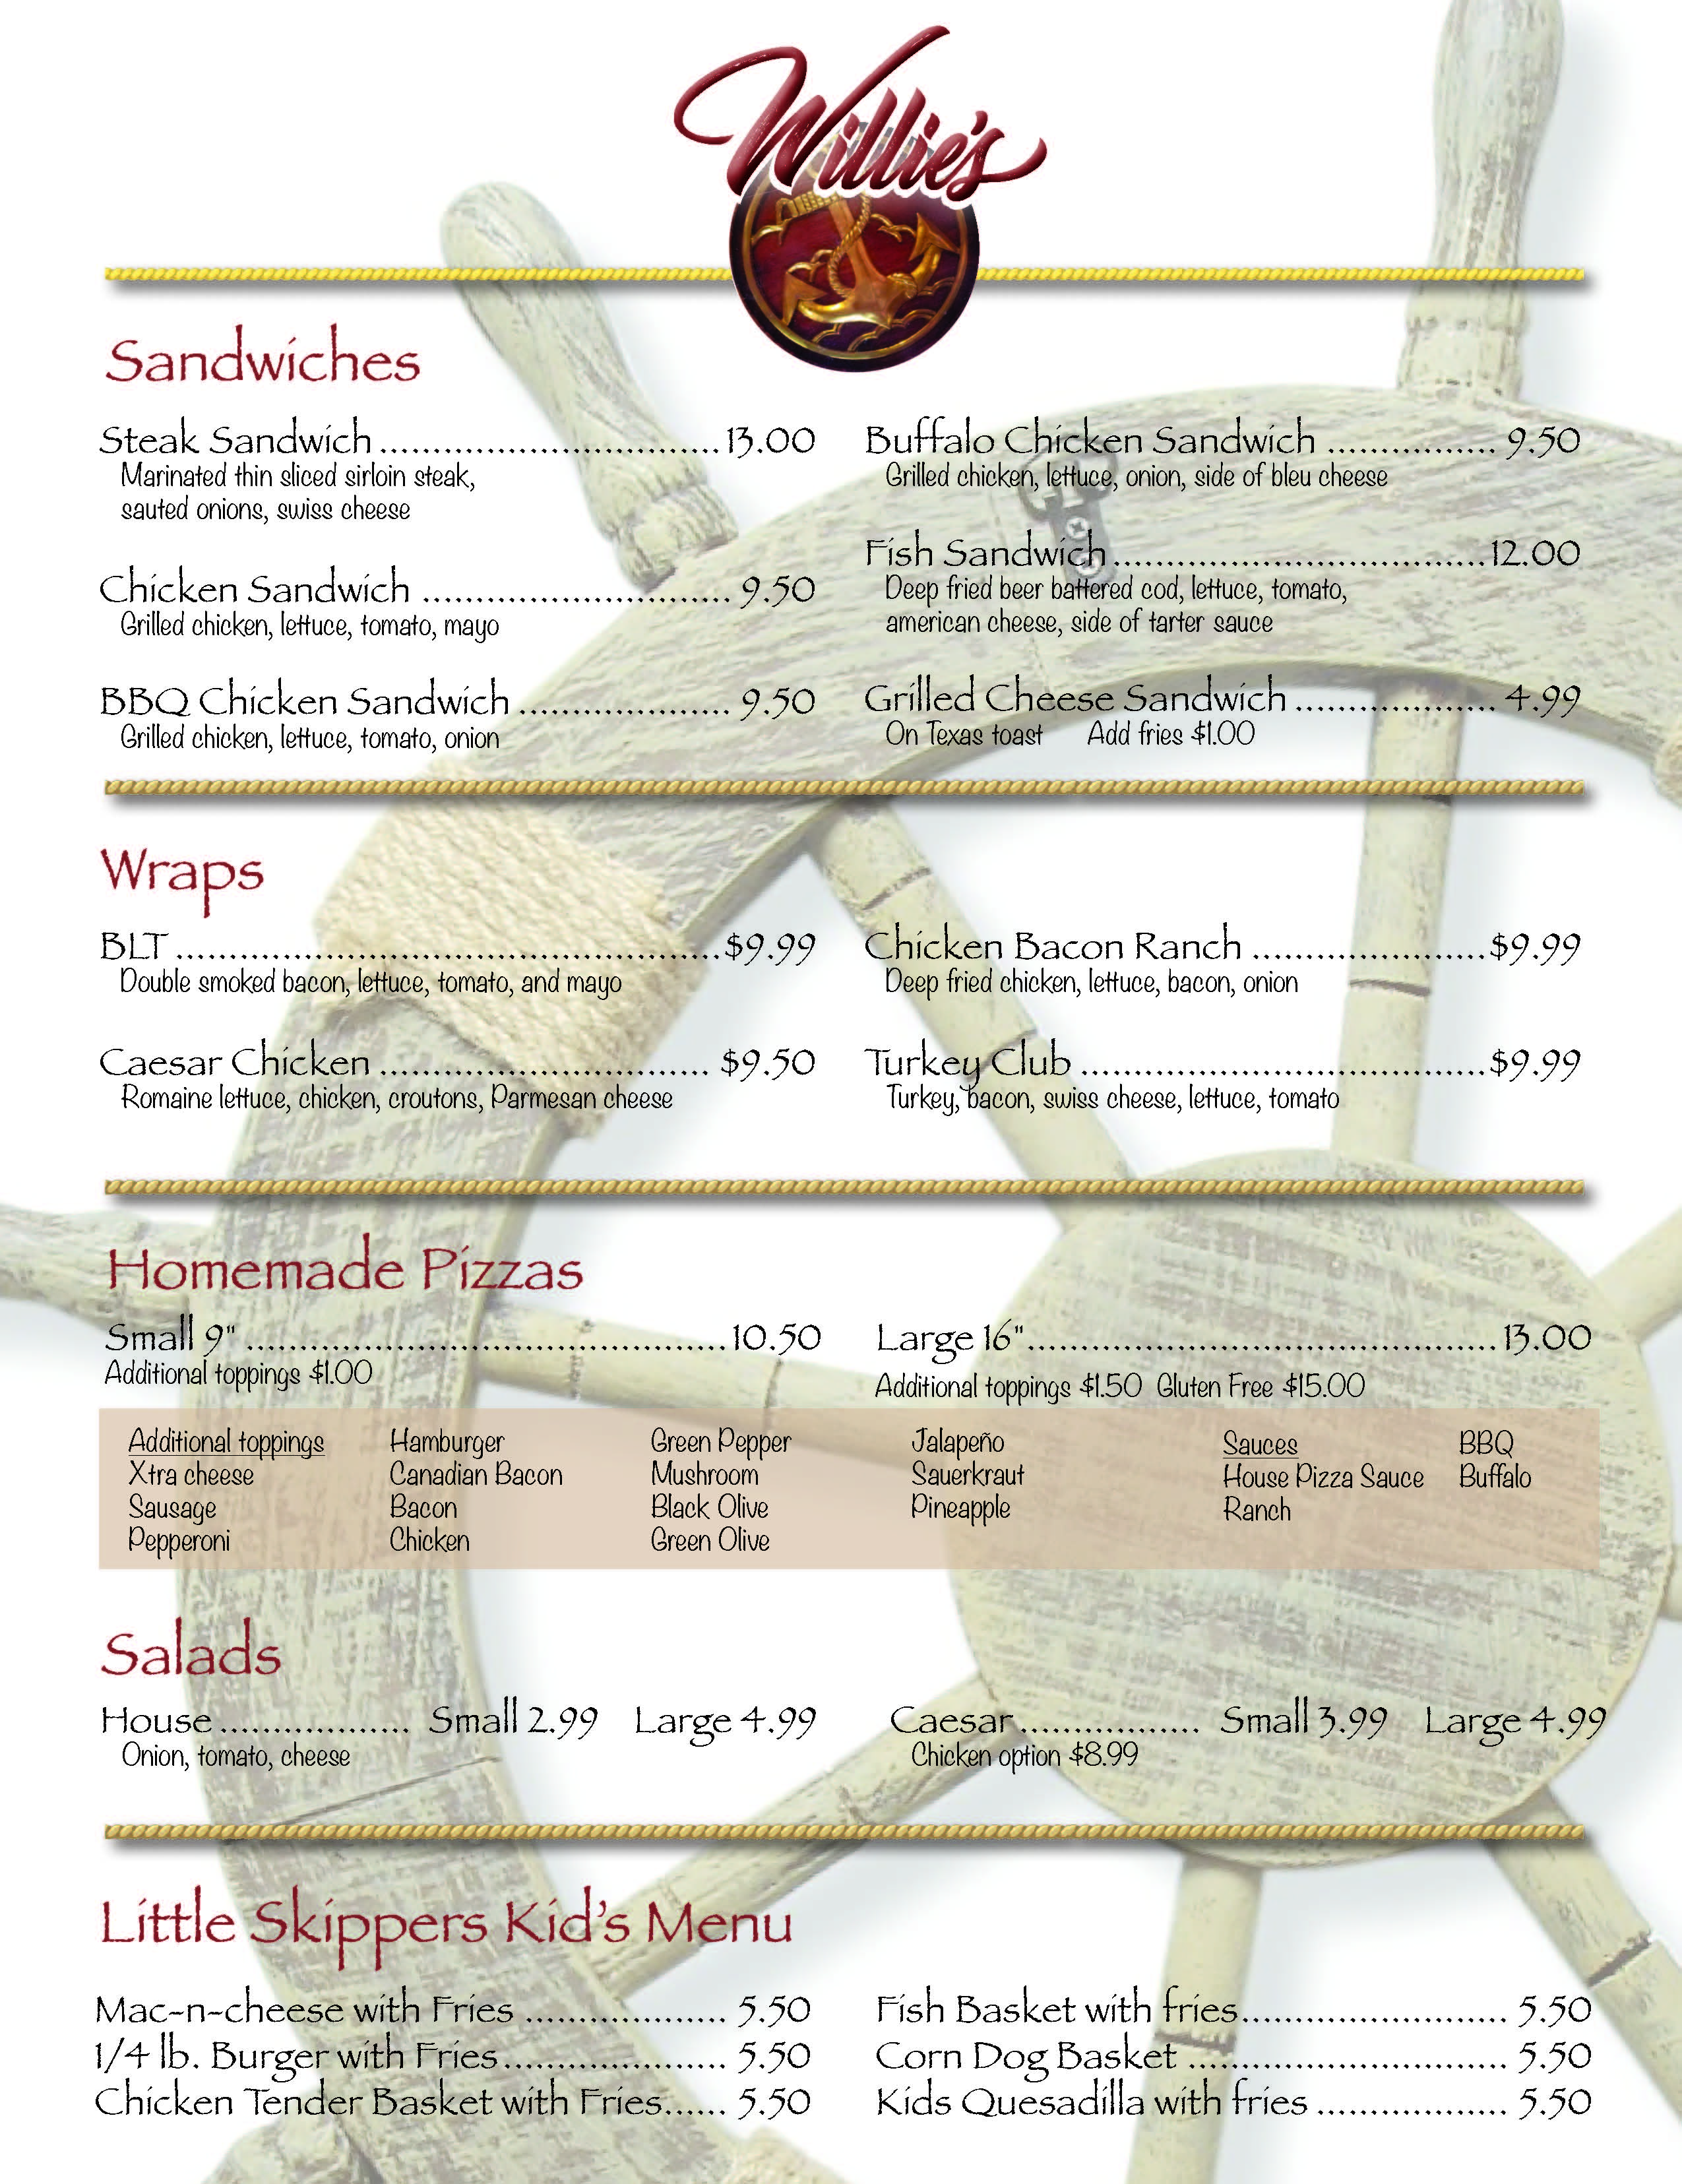 Willies menu Page 2 Welcome to Willie s